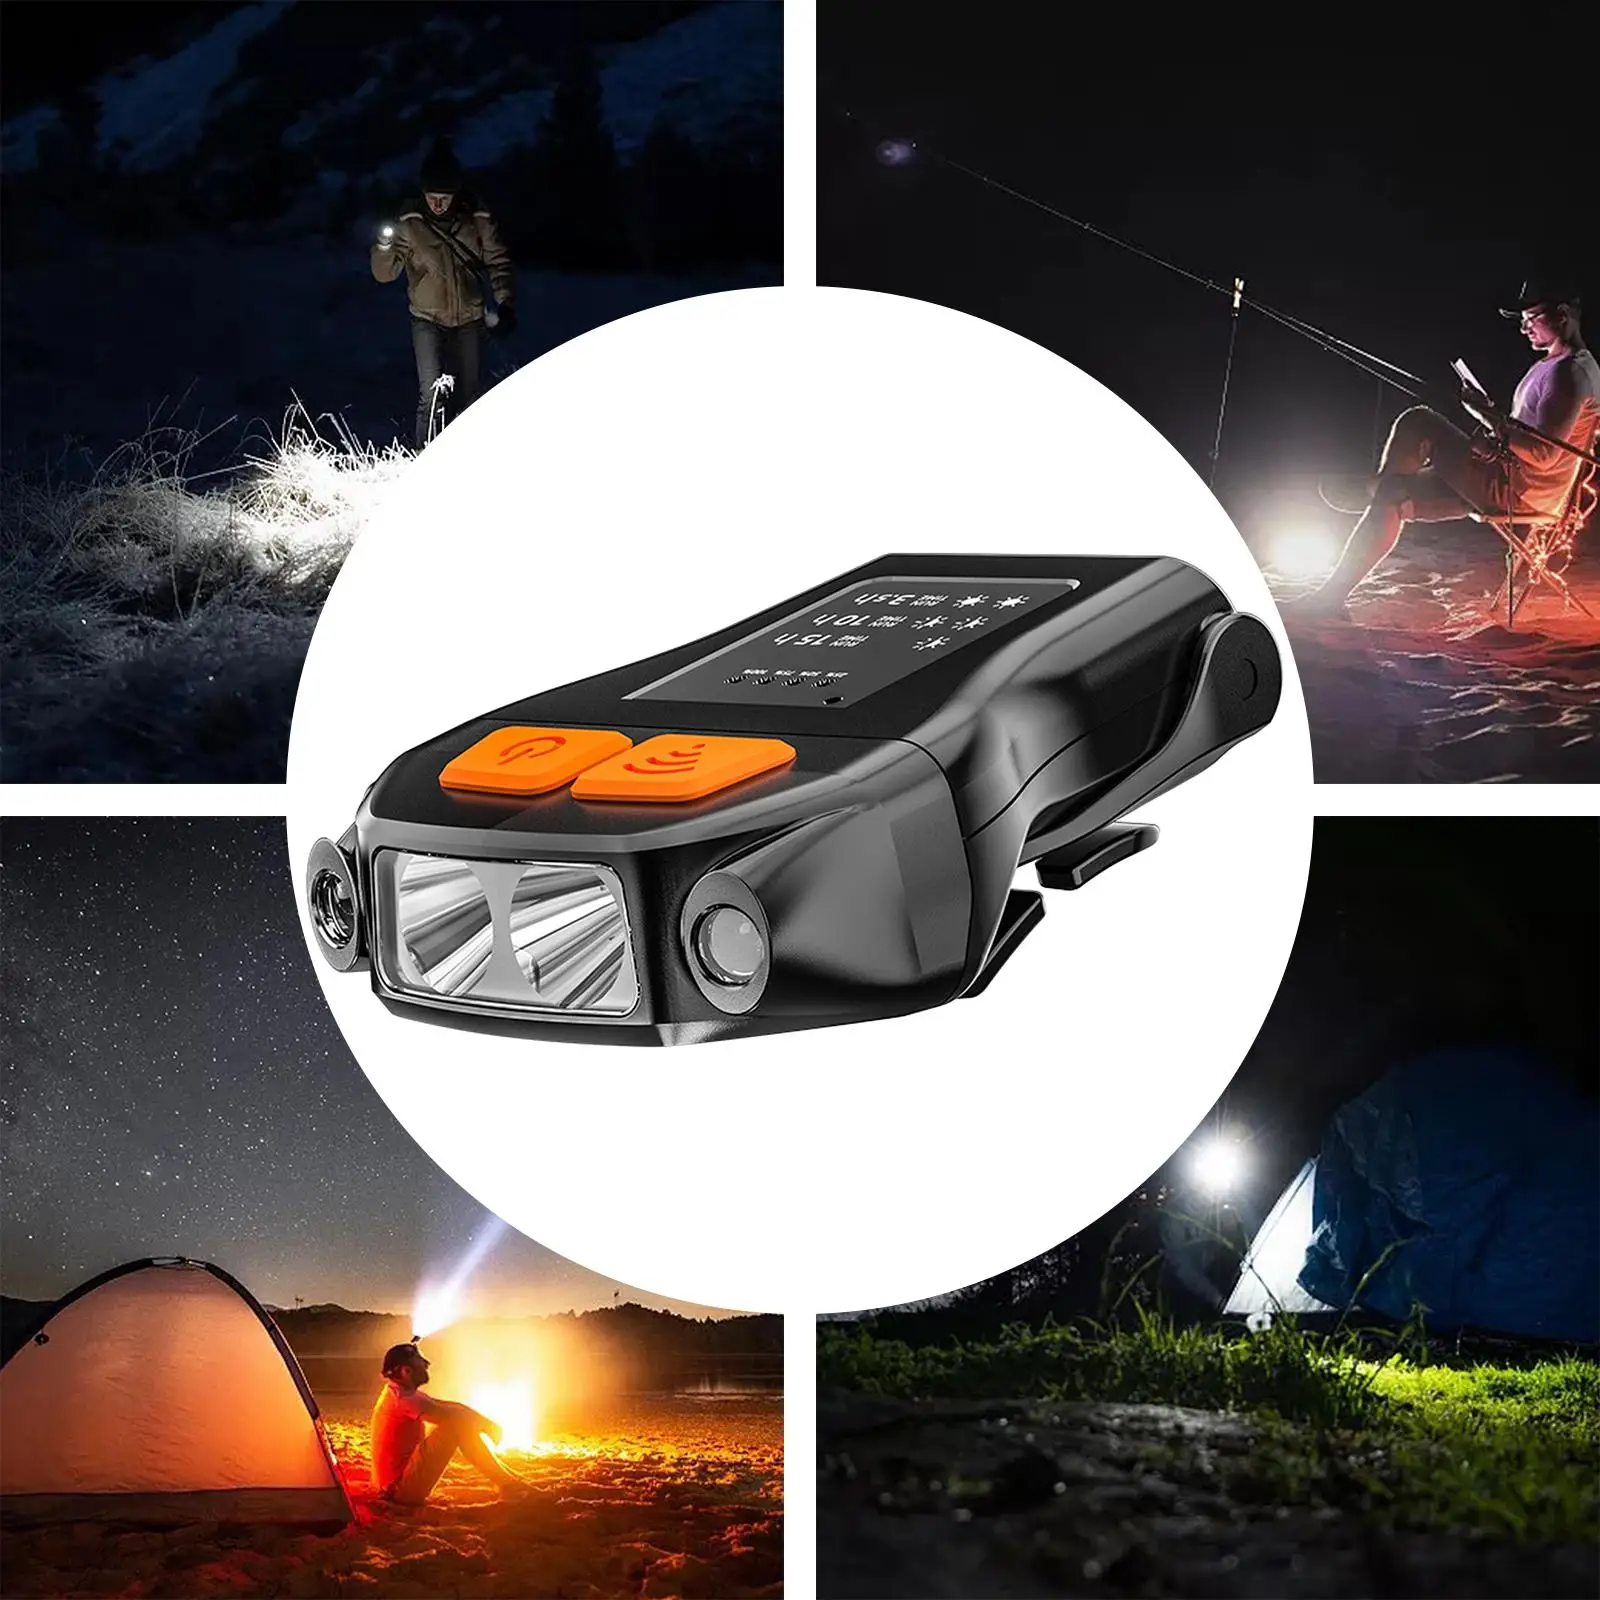 LED Headtorch Smart Sensor Clip-on Headlight Rechargeable Headtorch